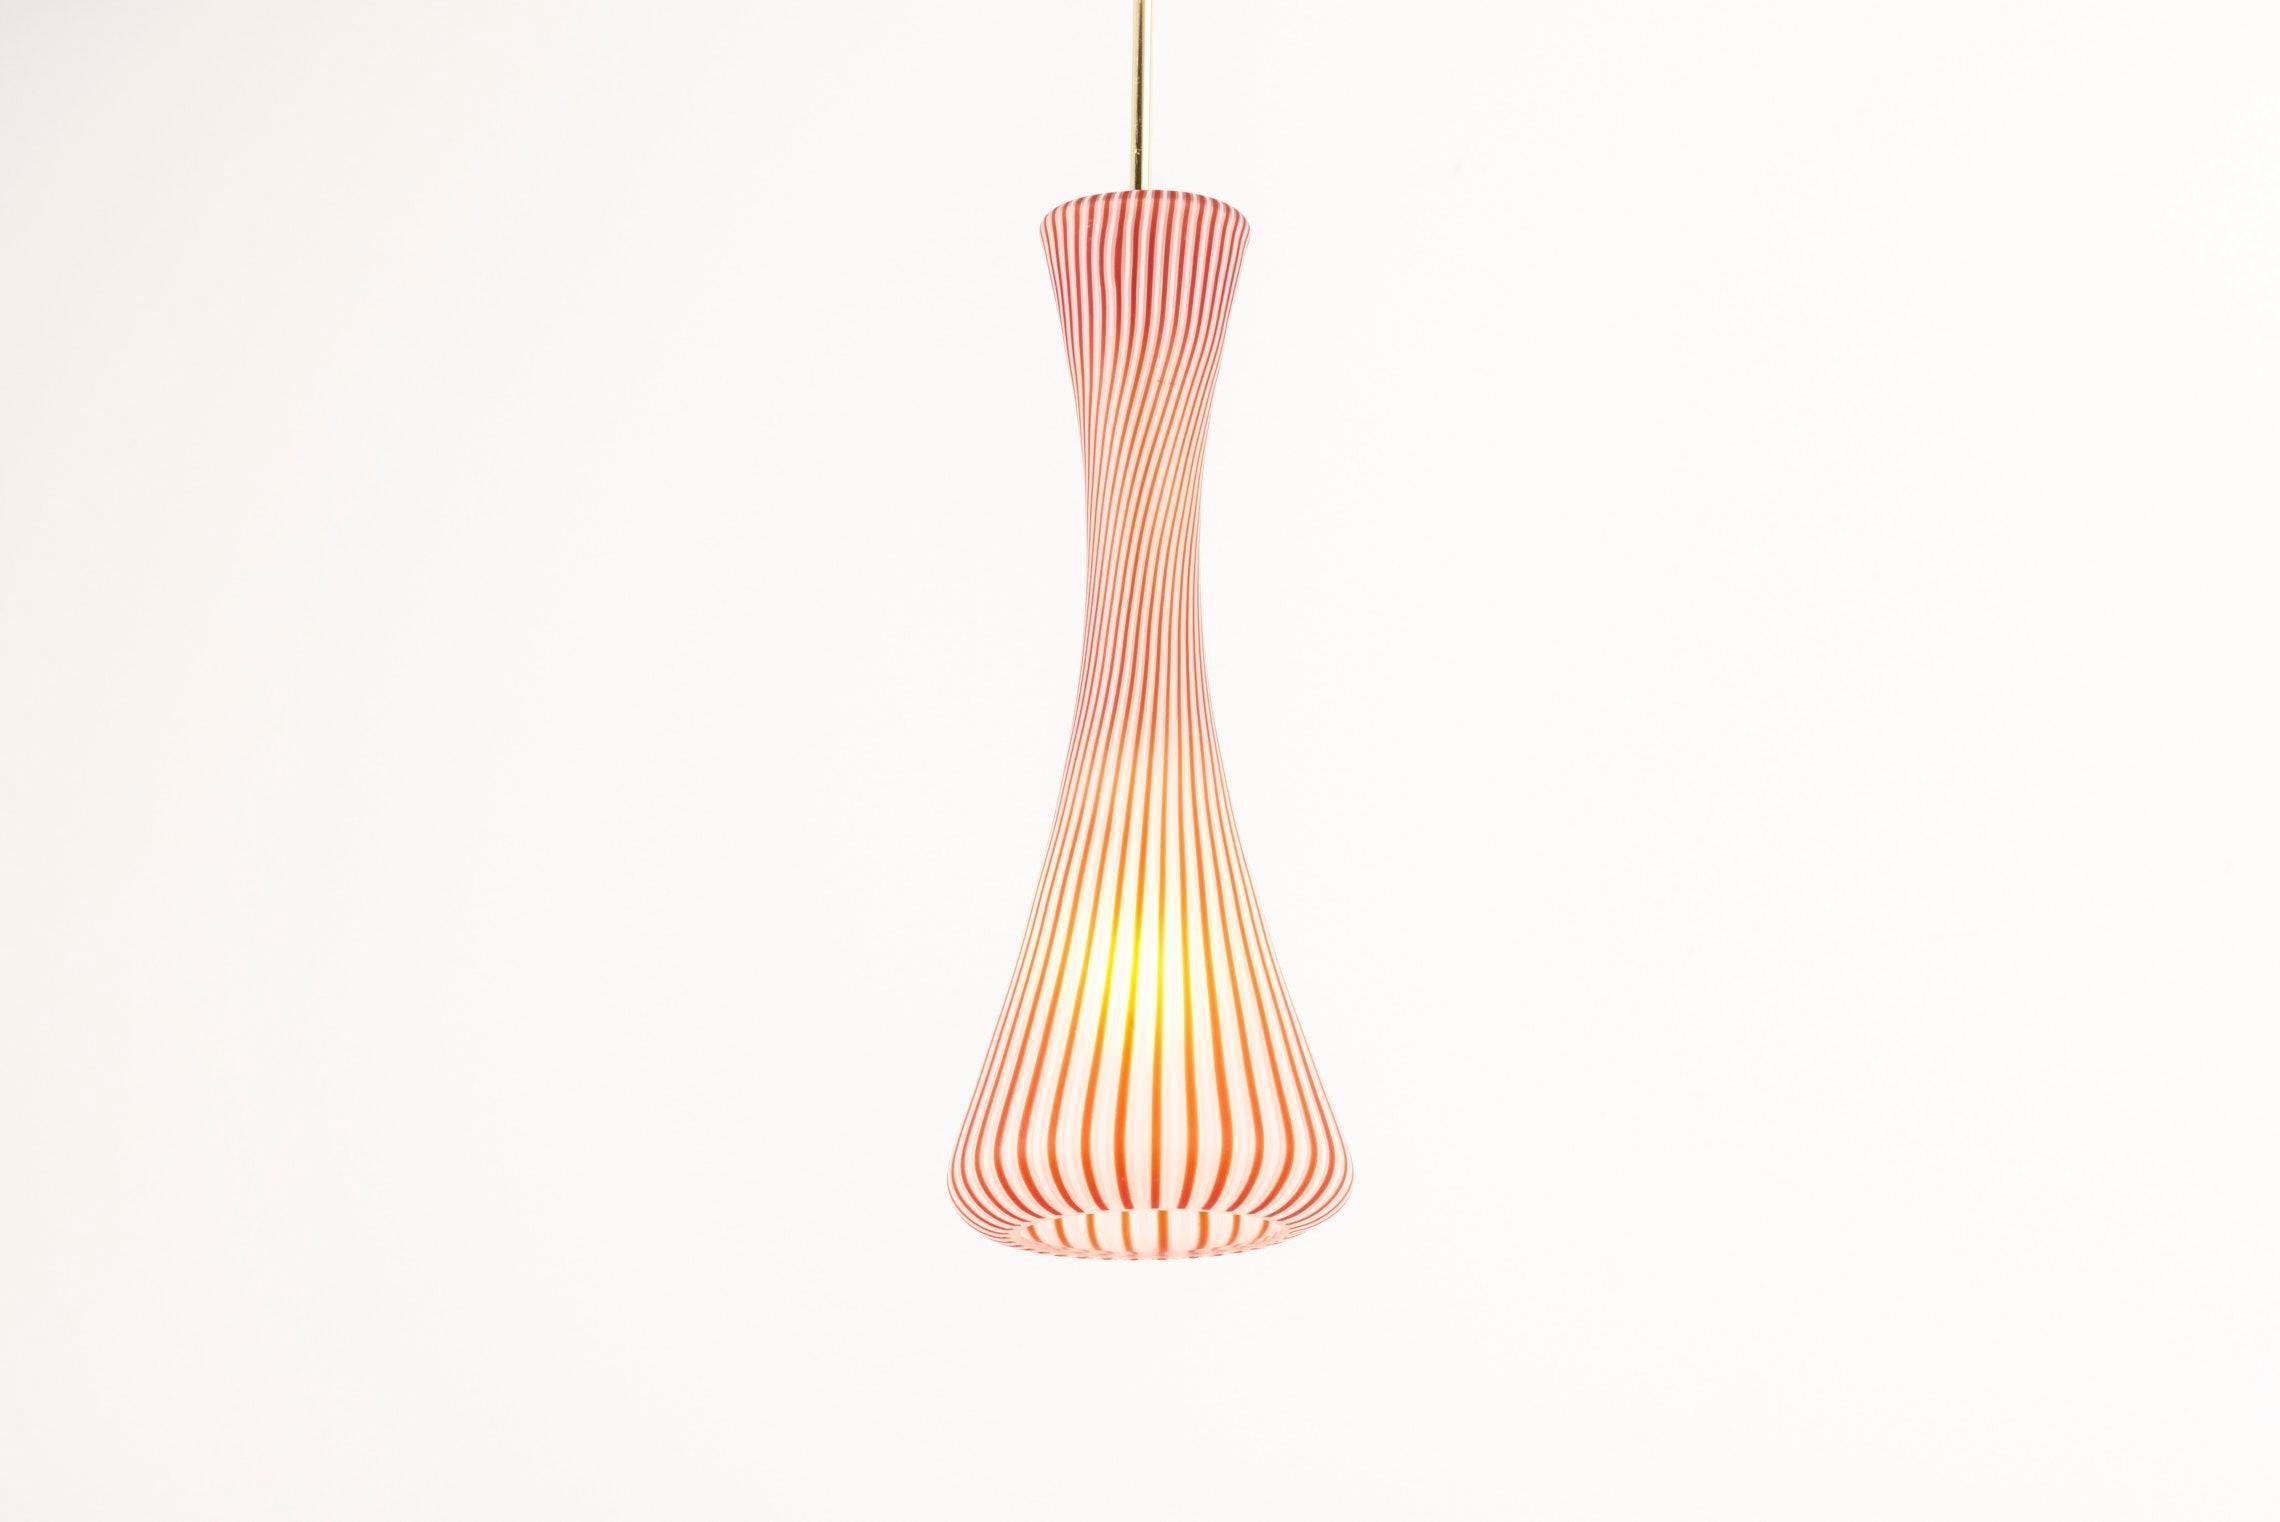 Mid-20th Century Pendant Murano Lamp in the Manner of Vignelli, Italy 1950s For Sale